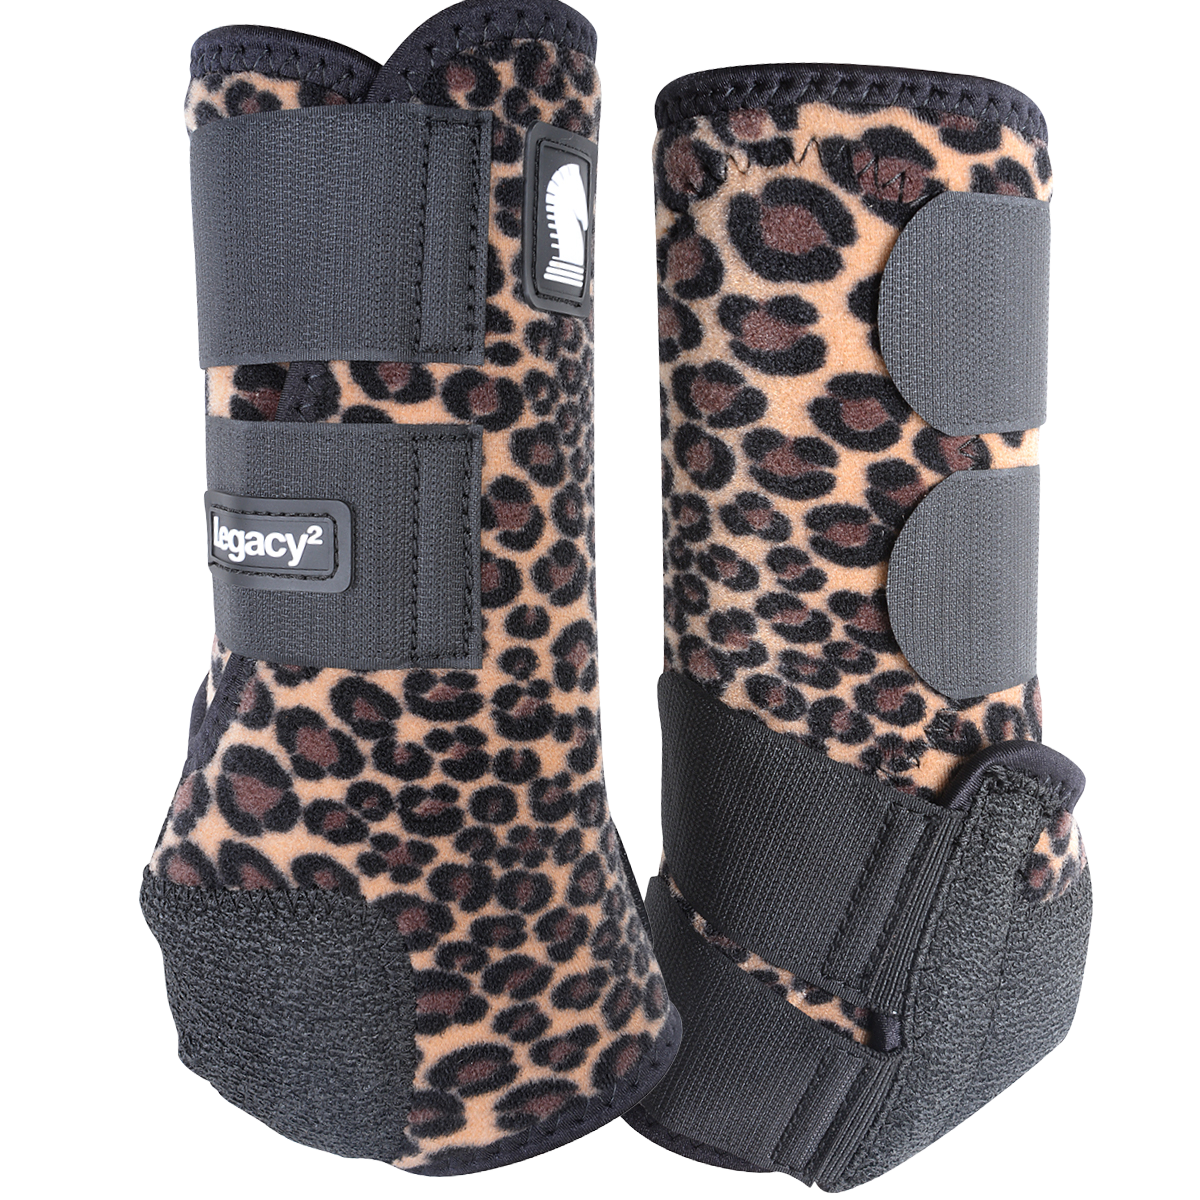 Classic Equine Legacy2 Front Support Boots Cheetah Print